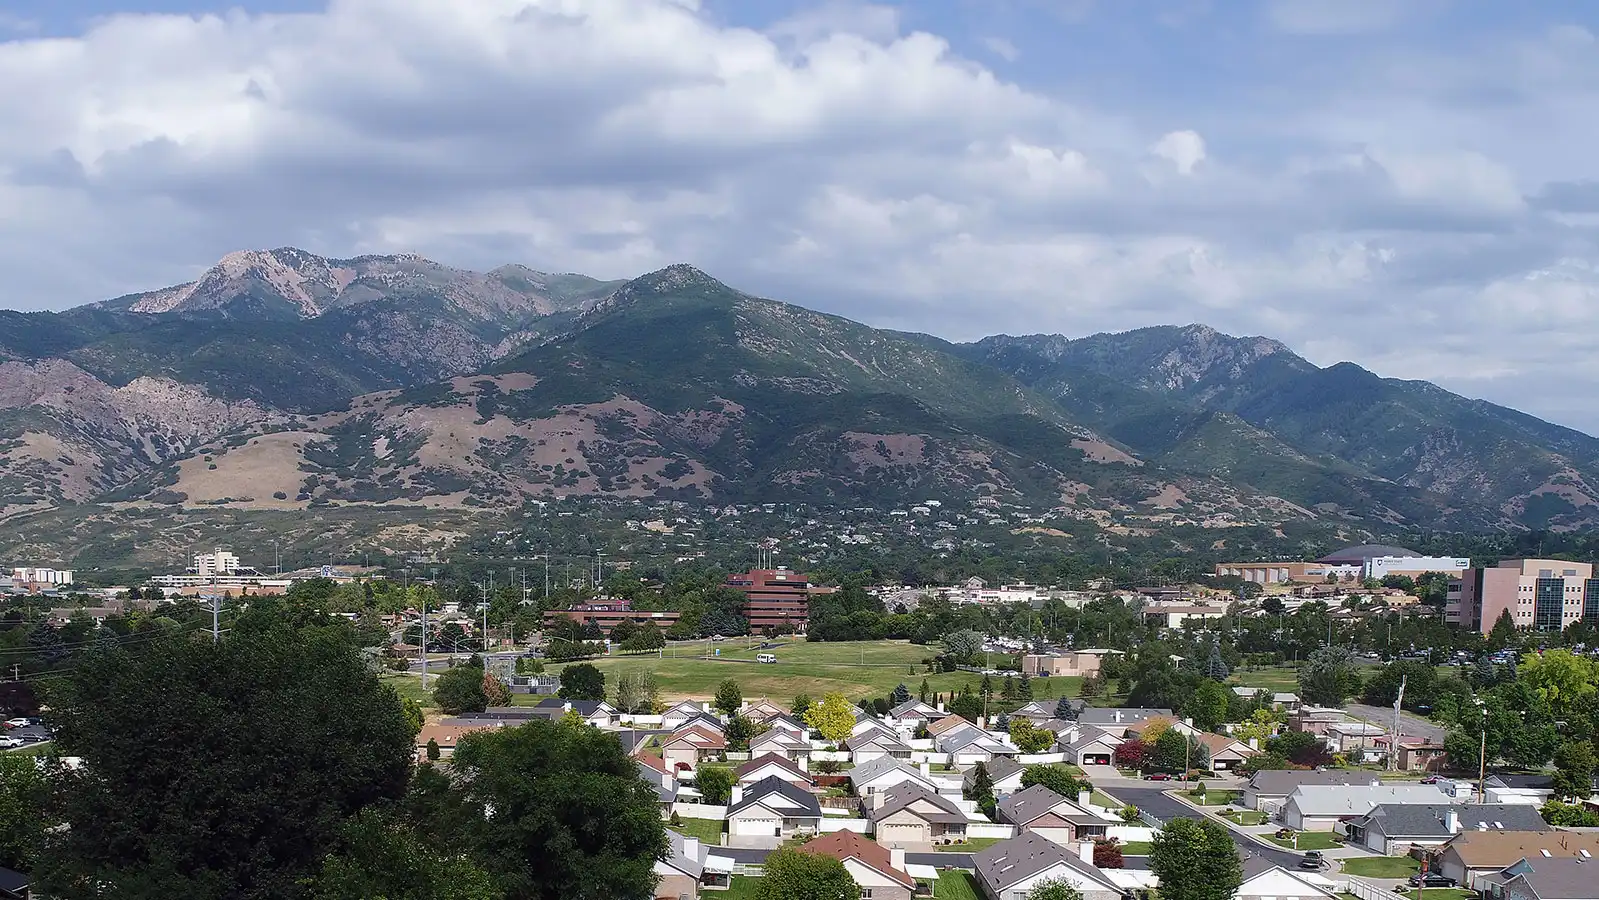 Panoramic view of South Ogden, Utah, with residential neighborhoods in the foreground and the verdant Wasatch Mountains rising majestically in the background under a cloudy sky.